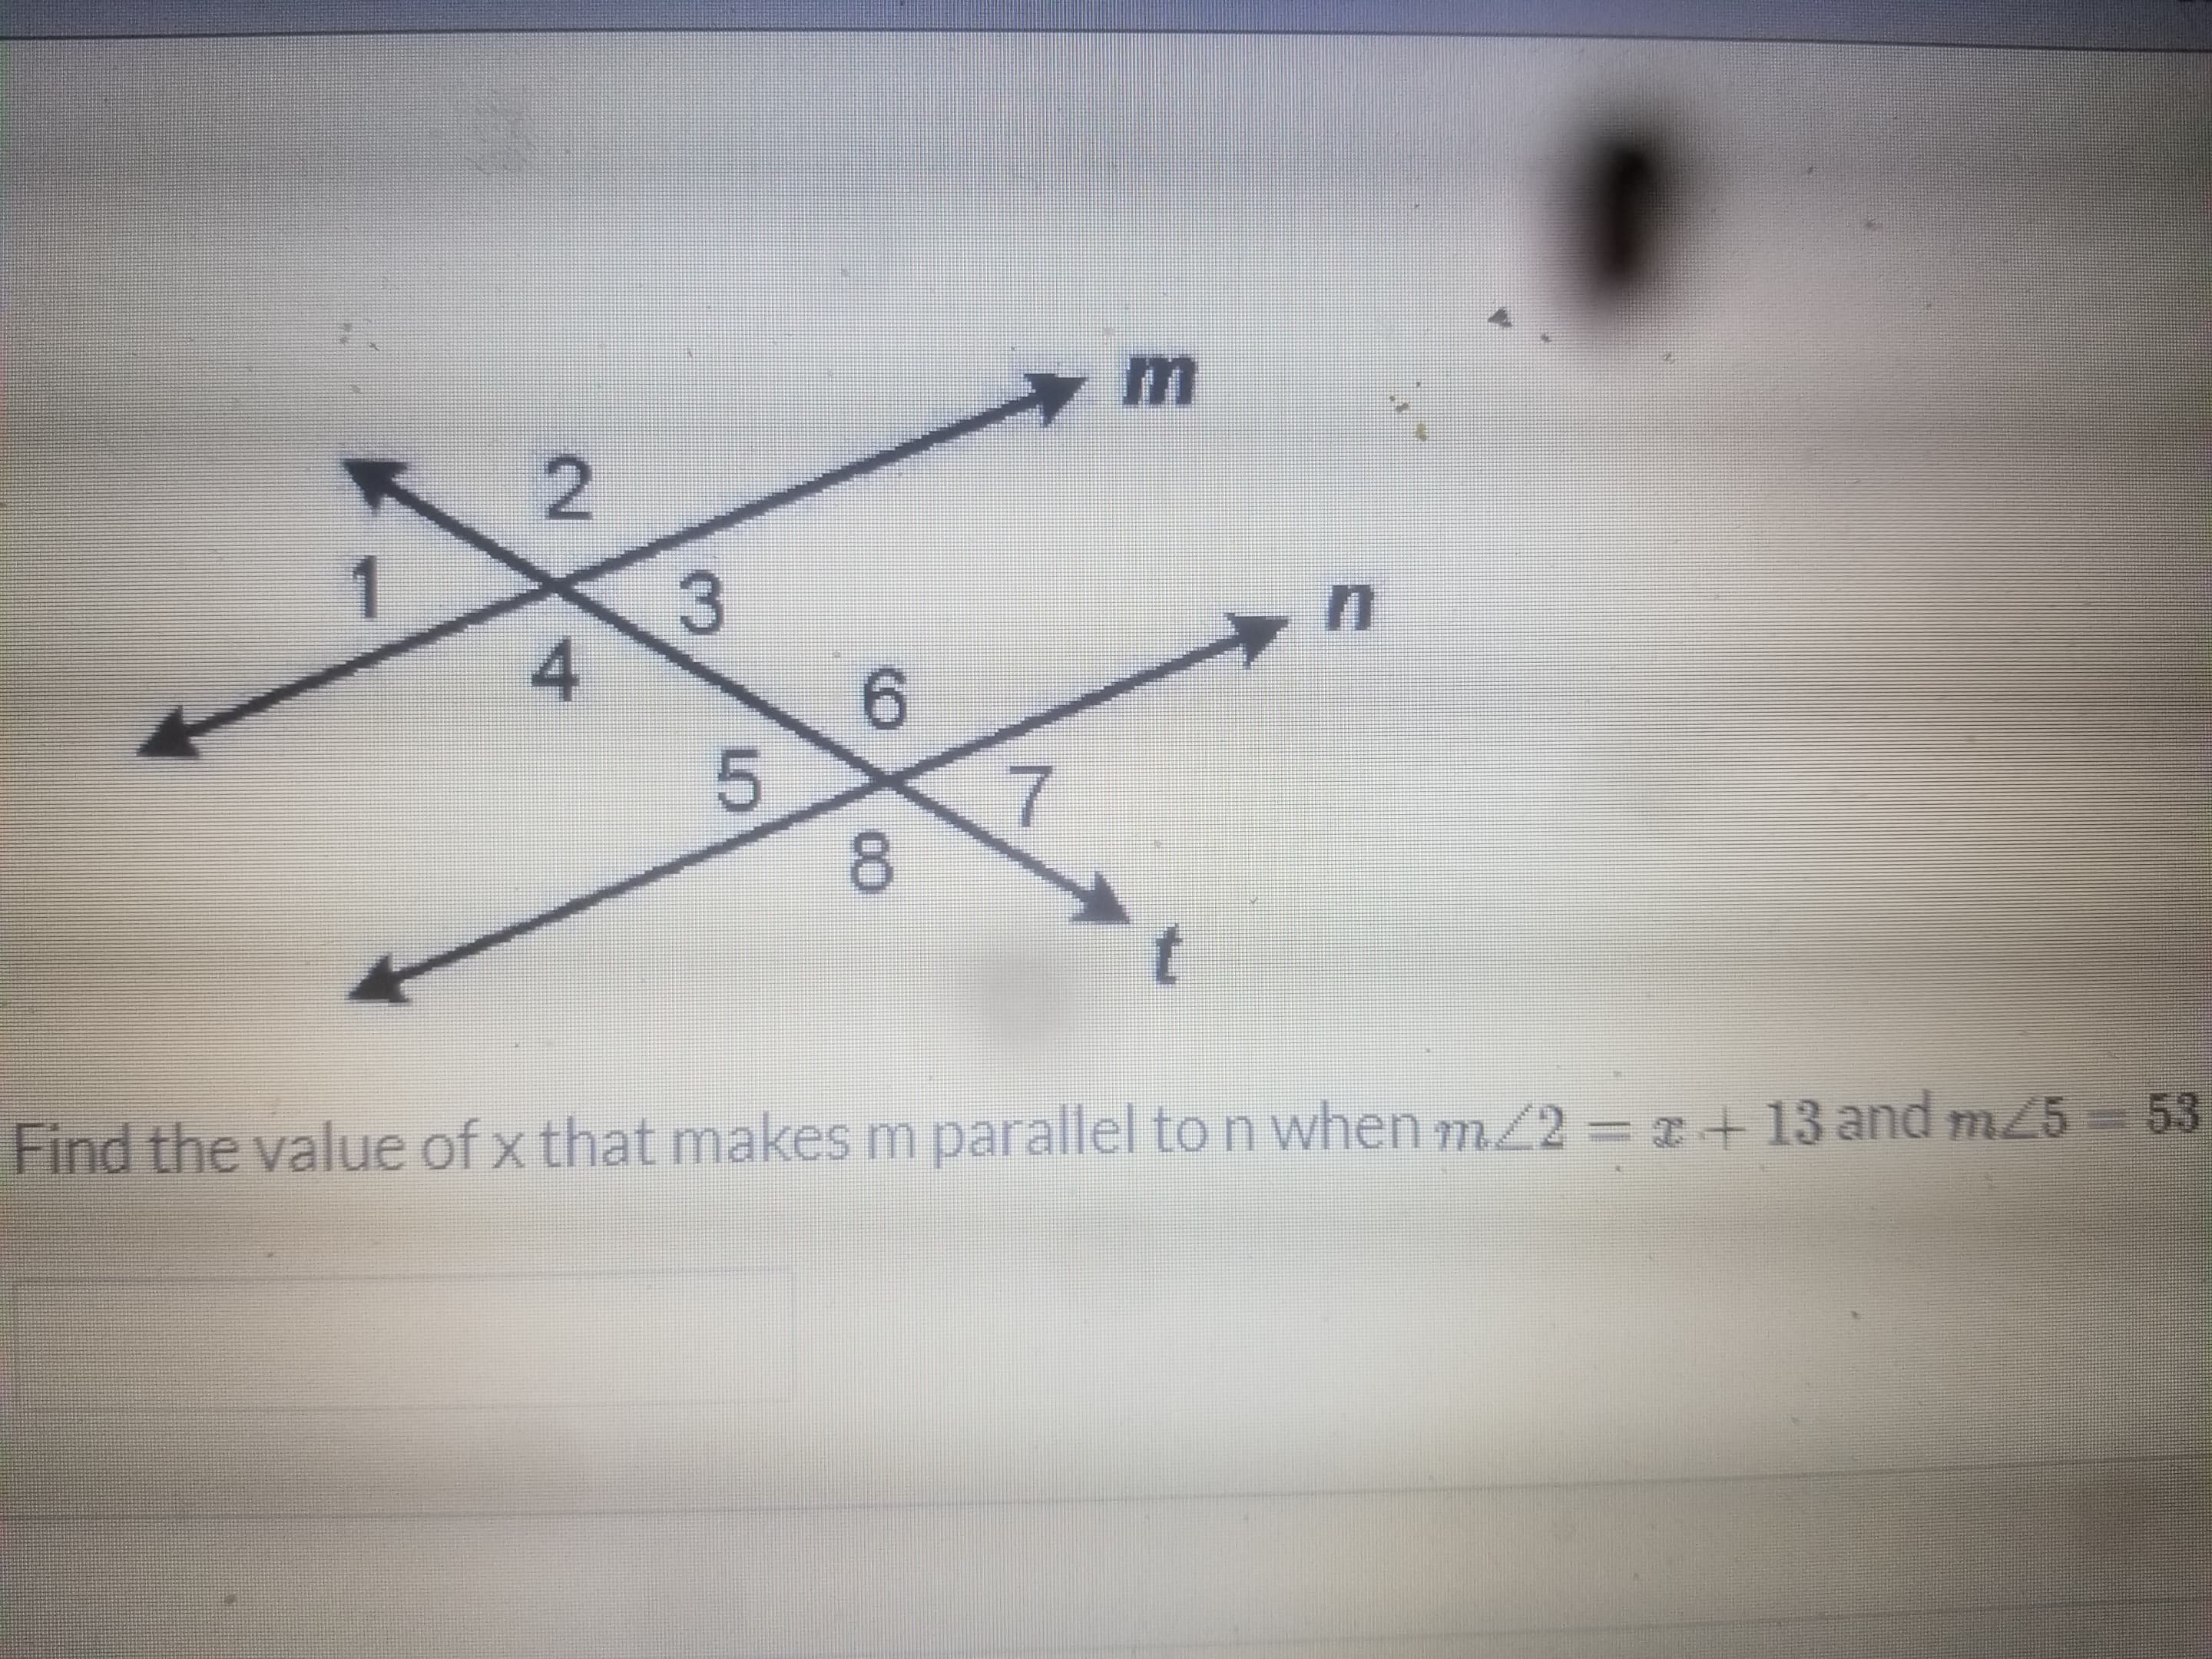 Find the value of x that makes m parallel to n when m./2
I+ 13 and m/5- 55
